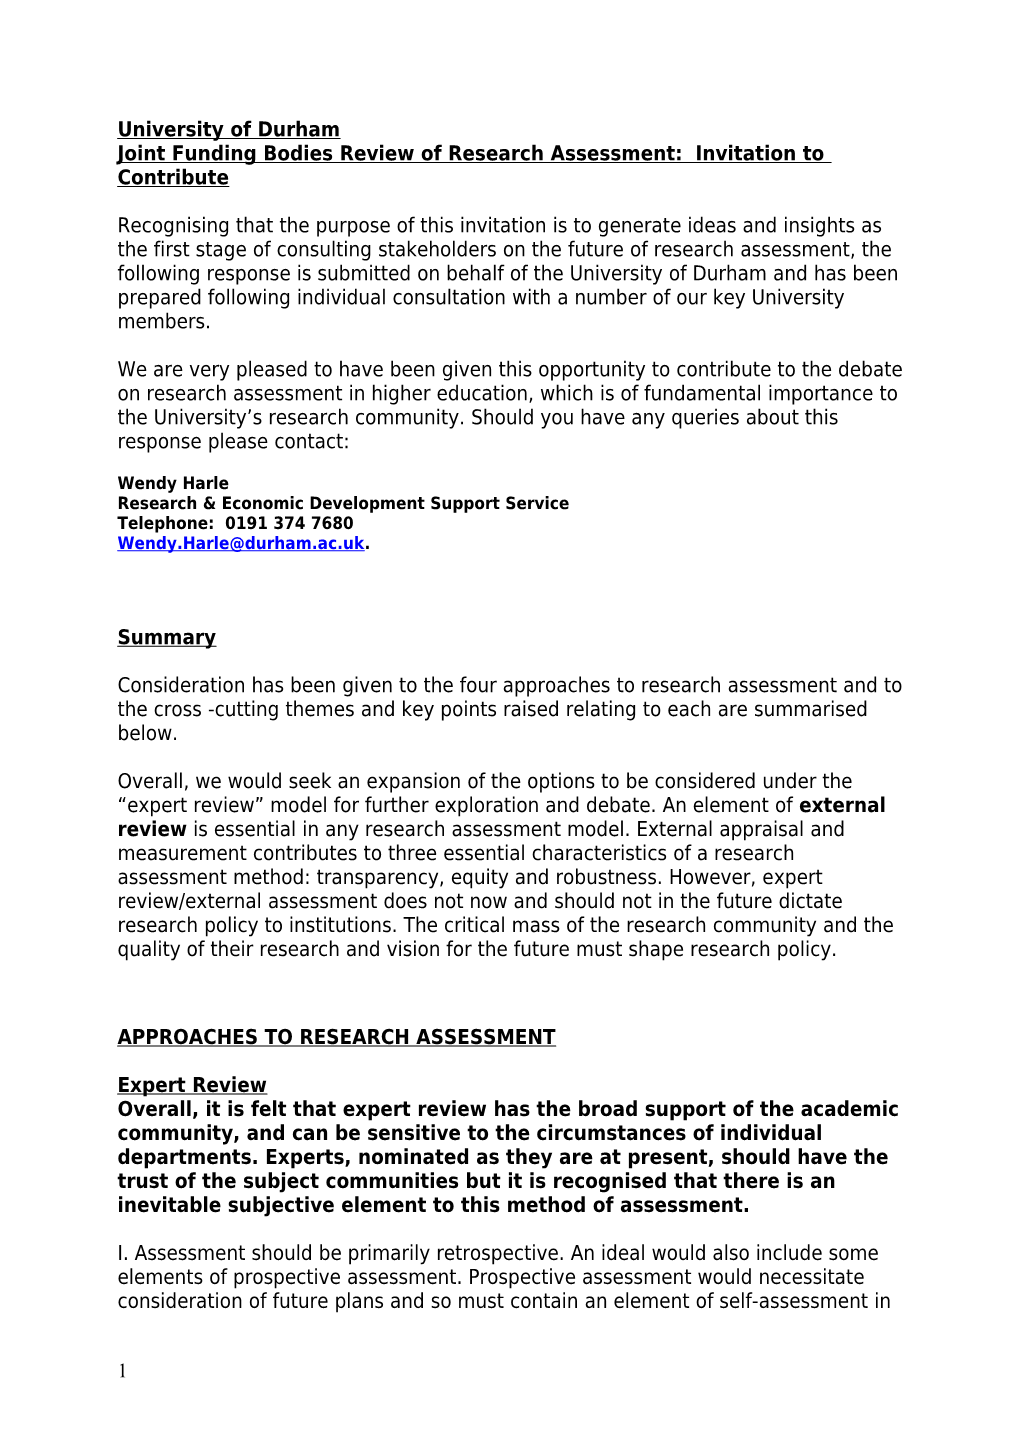 Research Assessment - Comments from Michael Prestwich